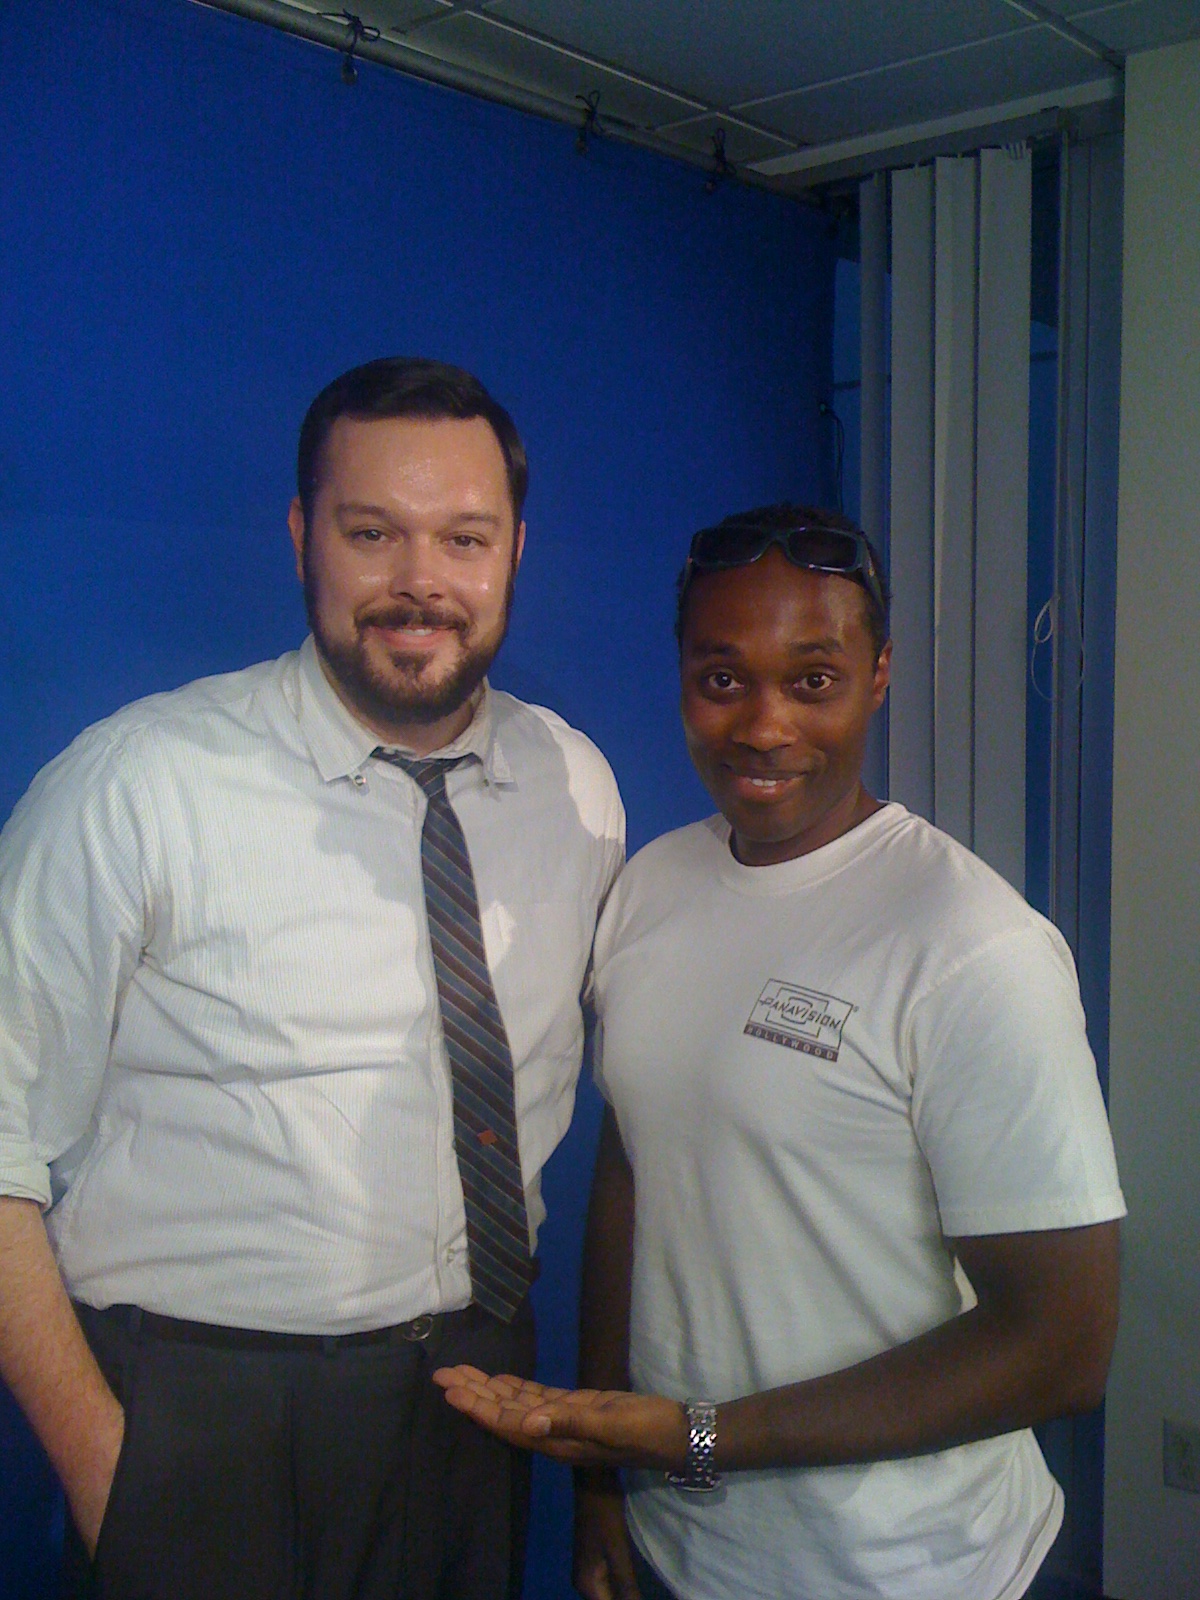 On the MADMEN set. Working as an editor on the MADMEN BluRay for seasons two and three. Left: Michael Gladis Right: Abdul Stone Jackson